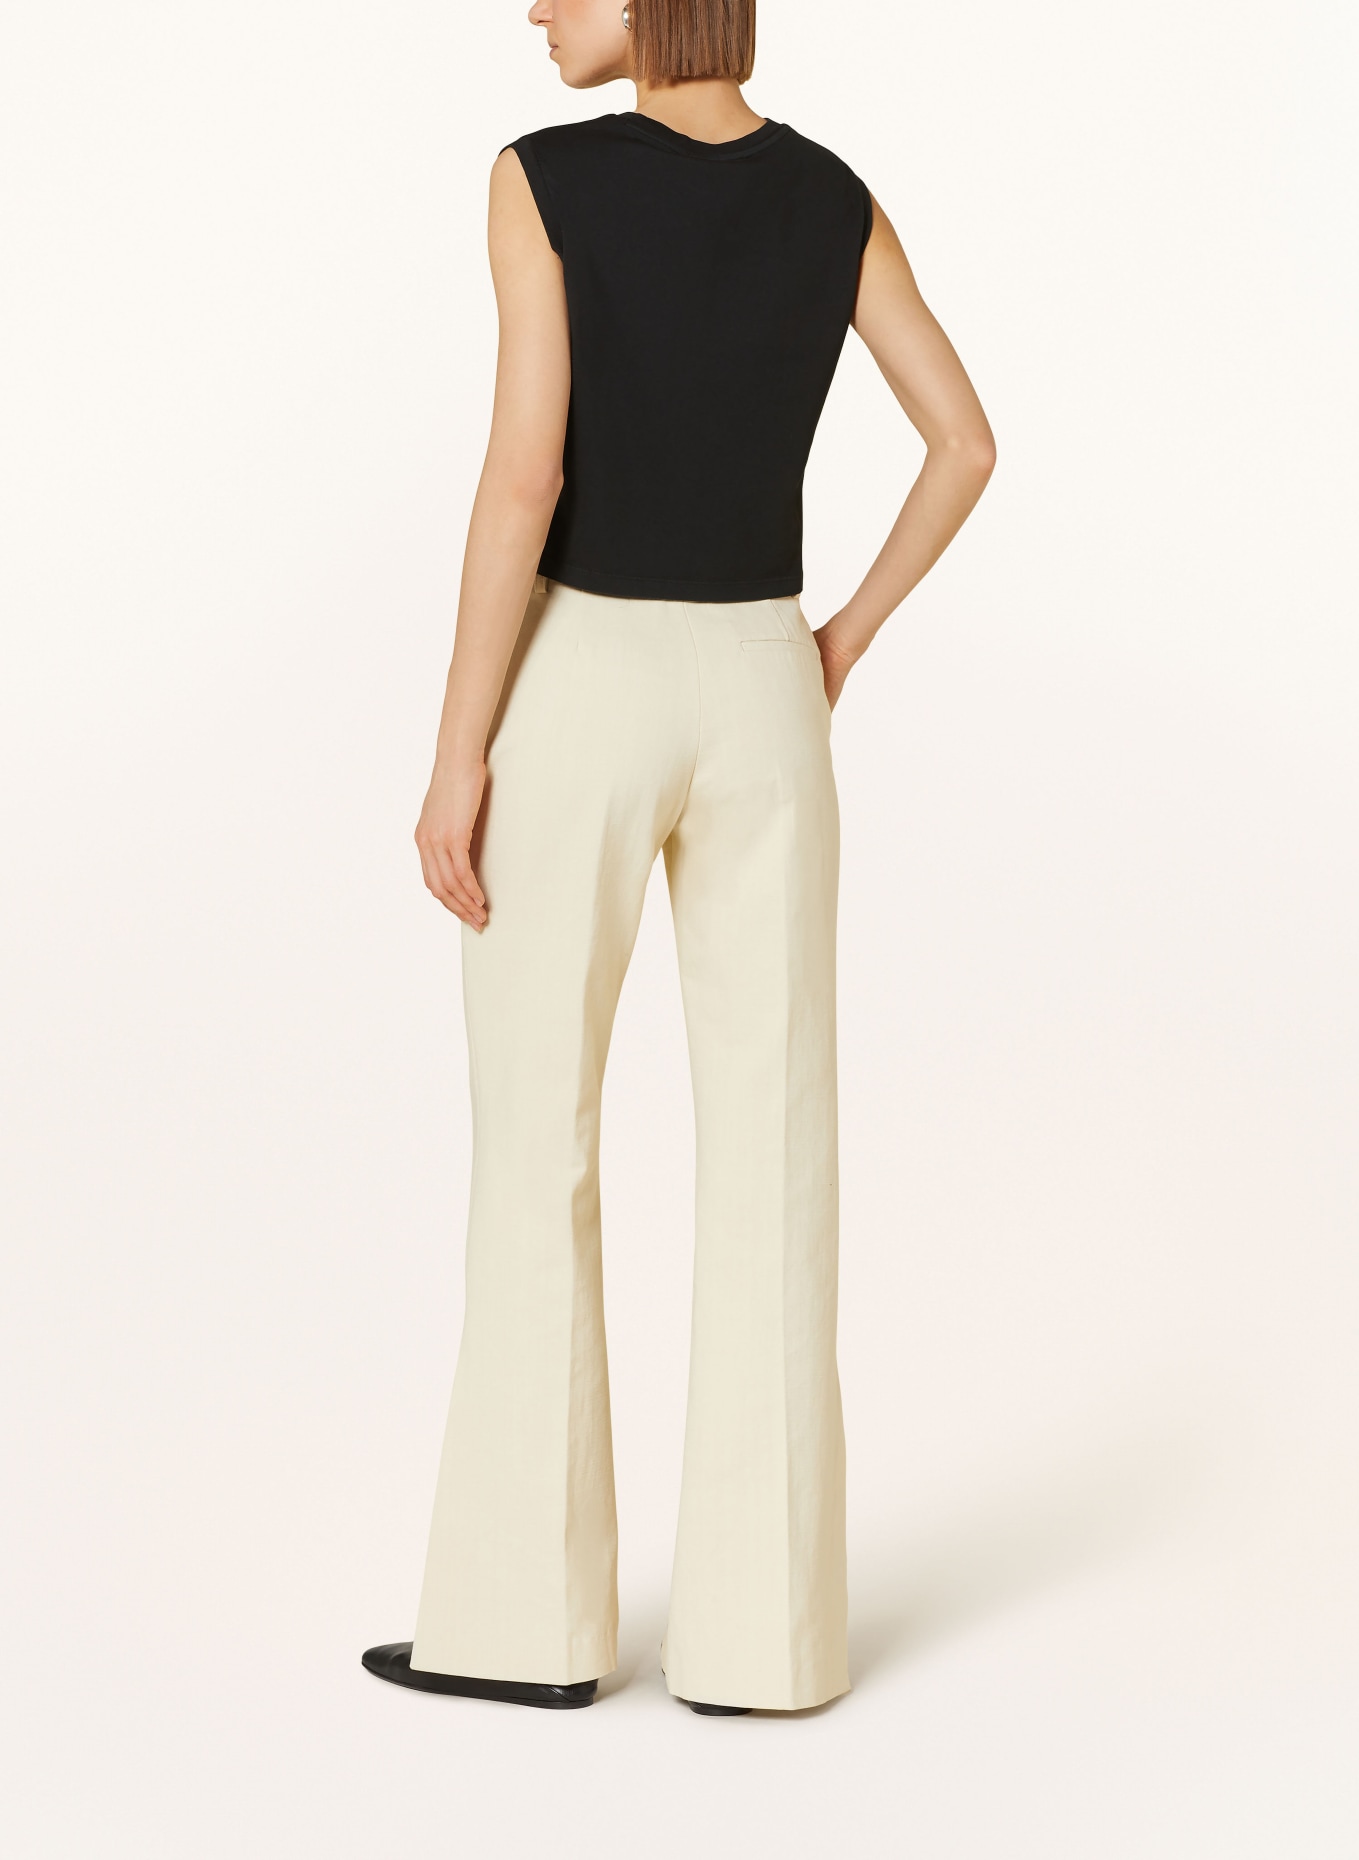 CLOSED Cropped top, Color: BLACK (Image 3)